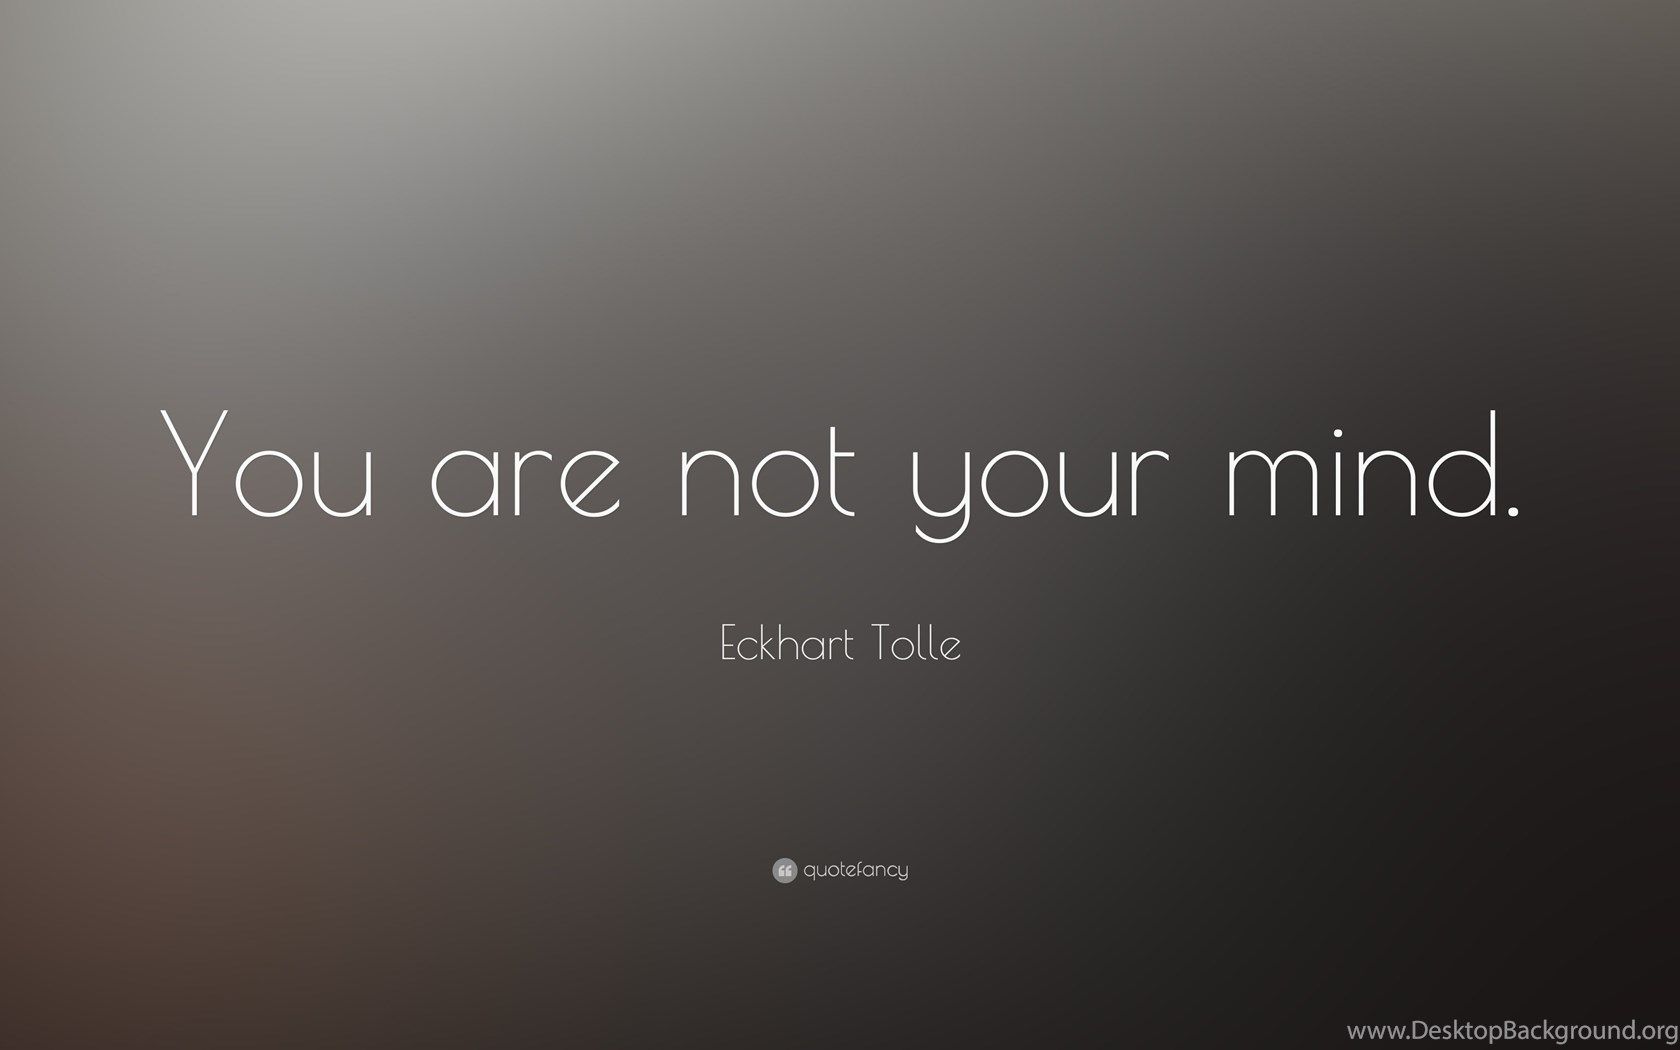 Eckhart Tolle Quote: “You Are Not Your Mind.” 13 Wallpaper. Desktop Background